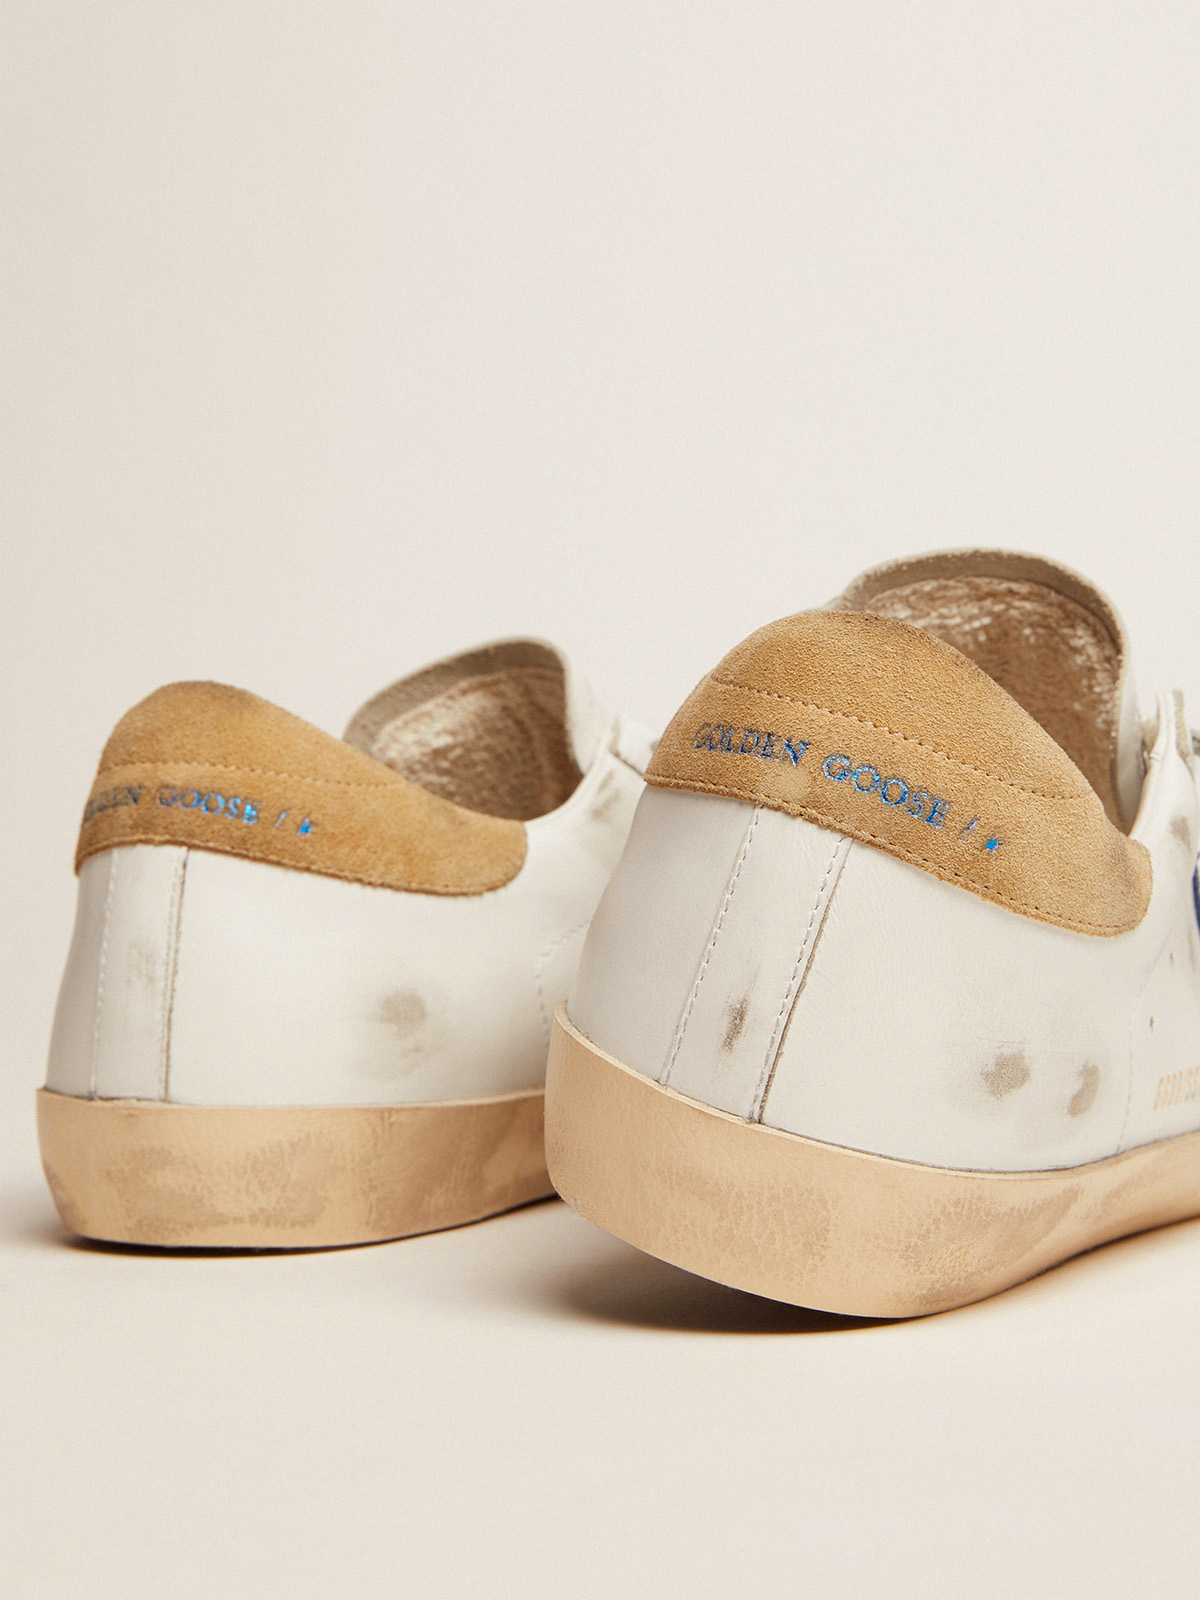 Super-Star sneakers with sand-colored suede heel tab and blue 